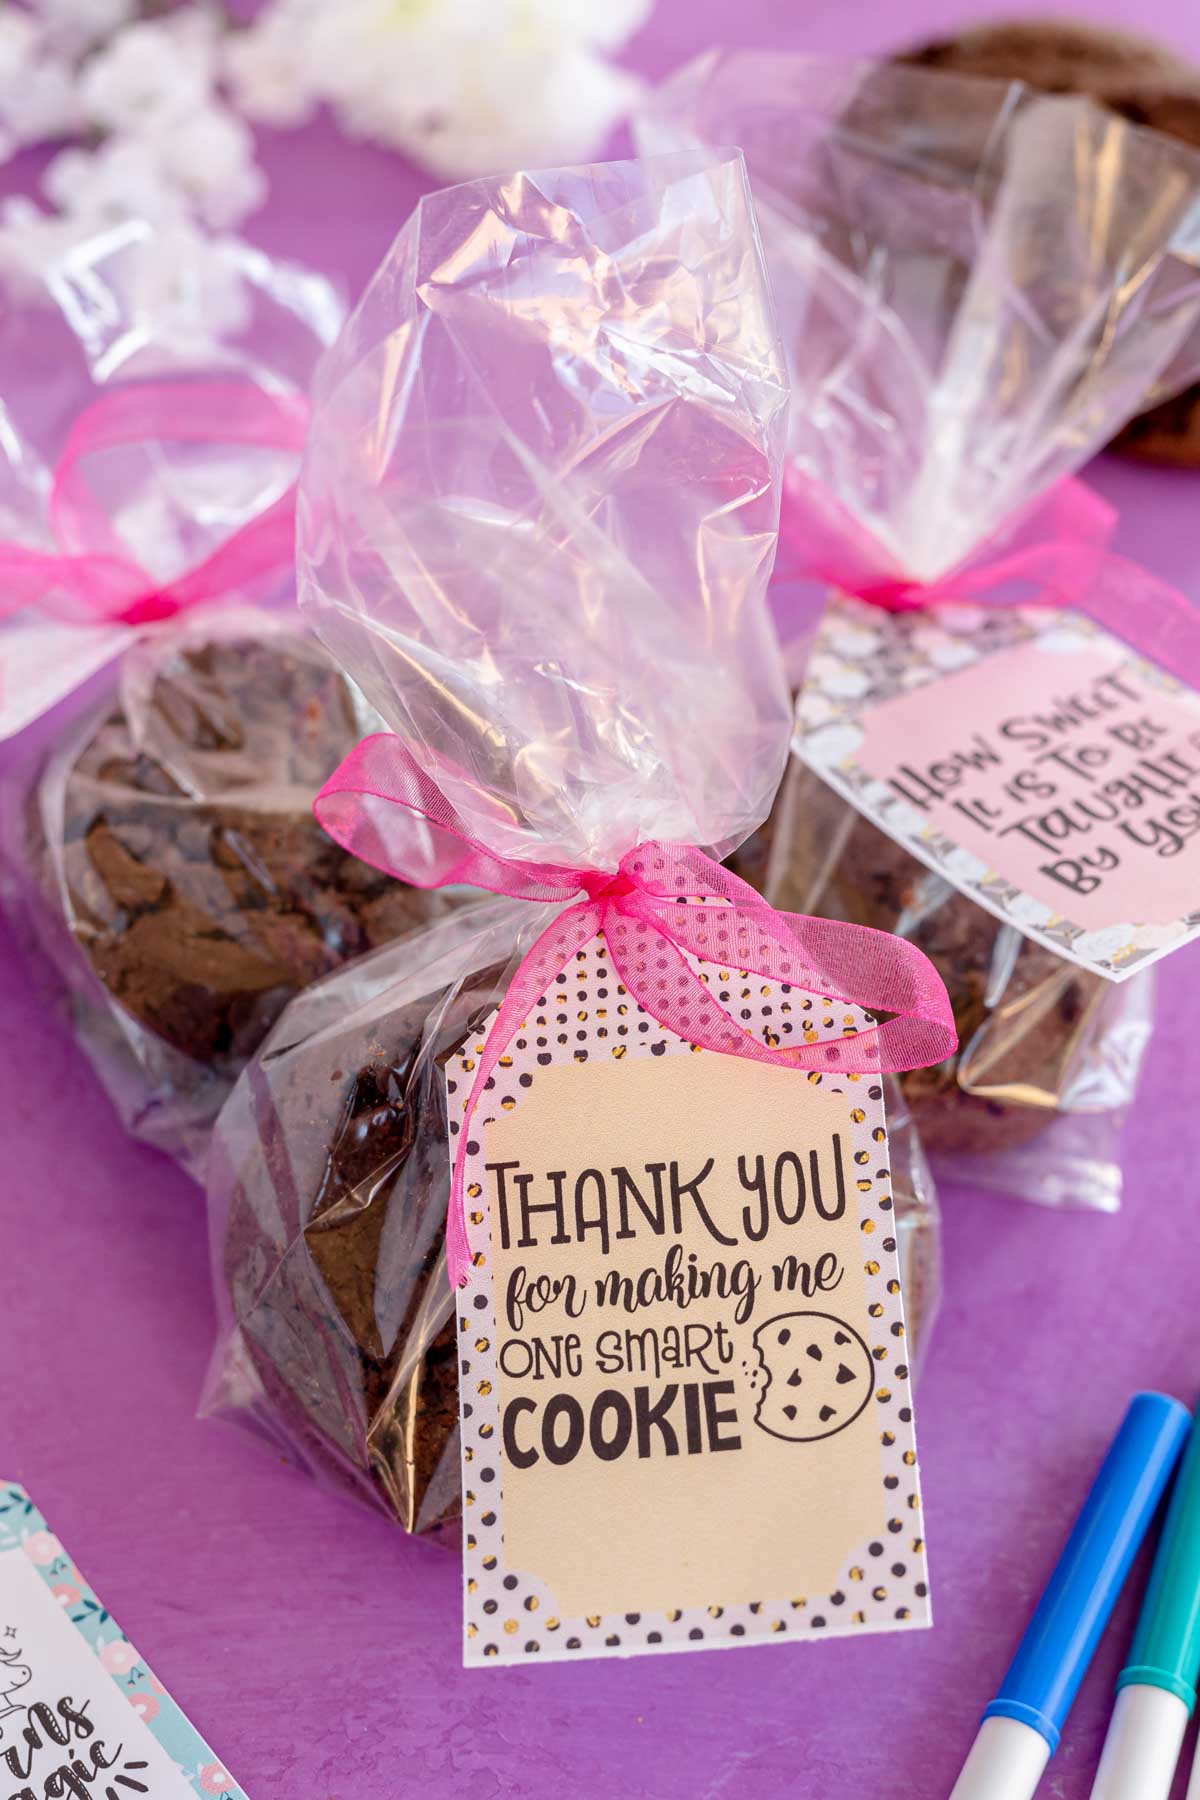 bags of cookies with teacher appreciation gift tags on them